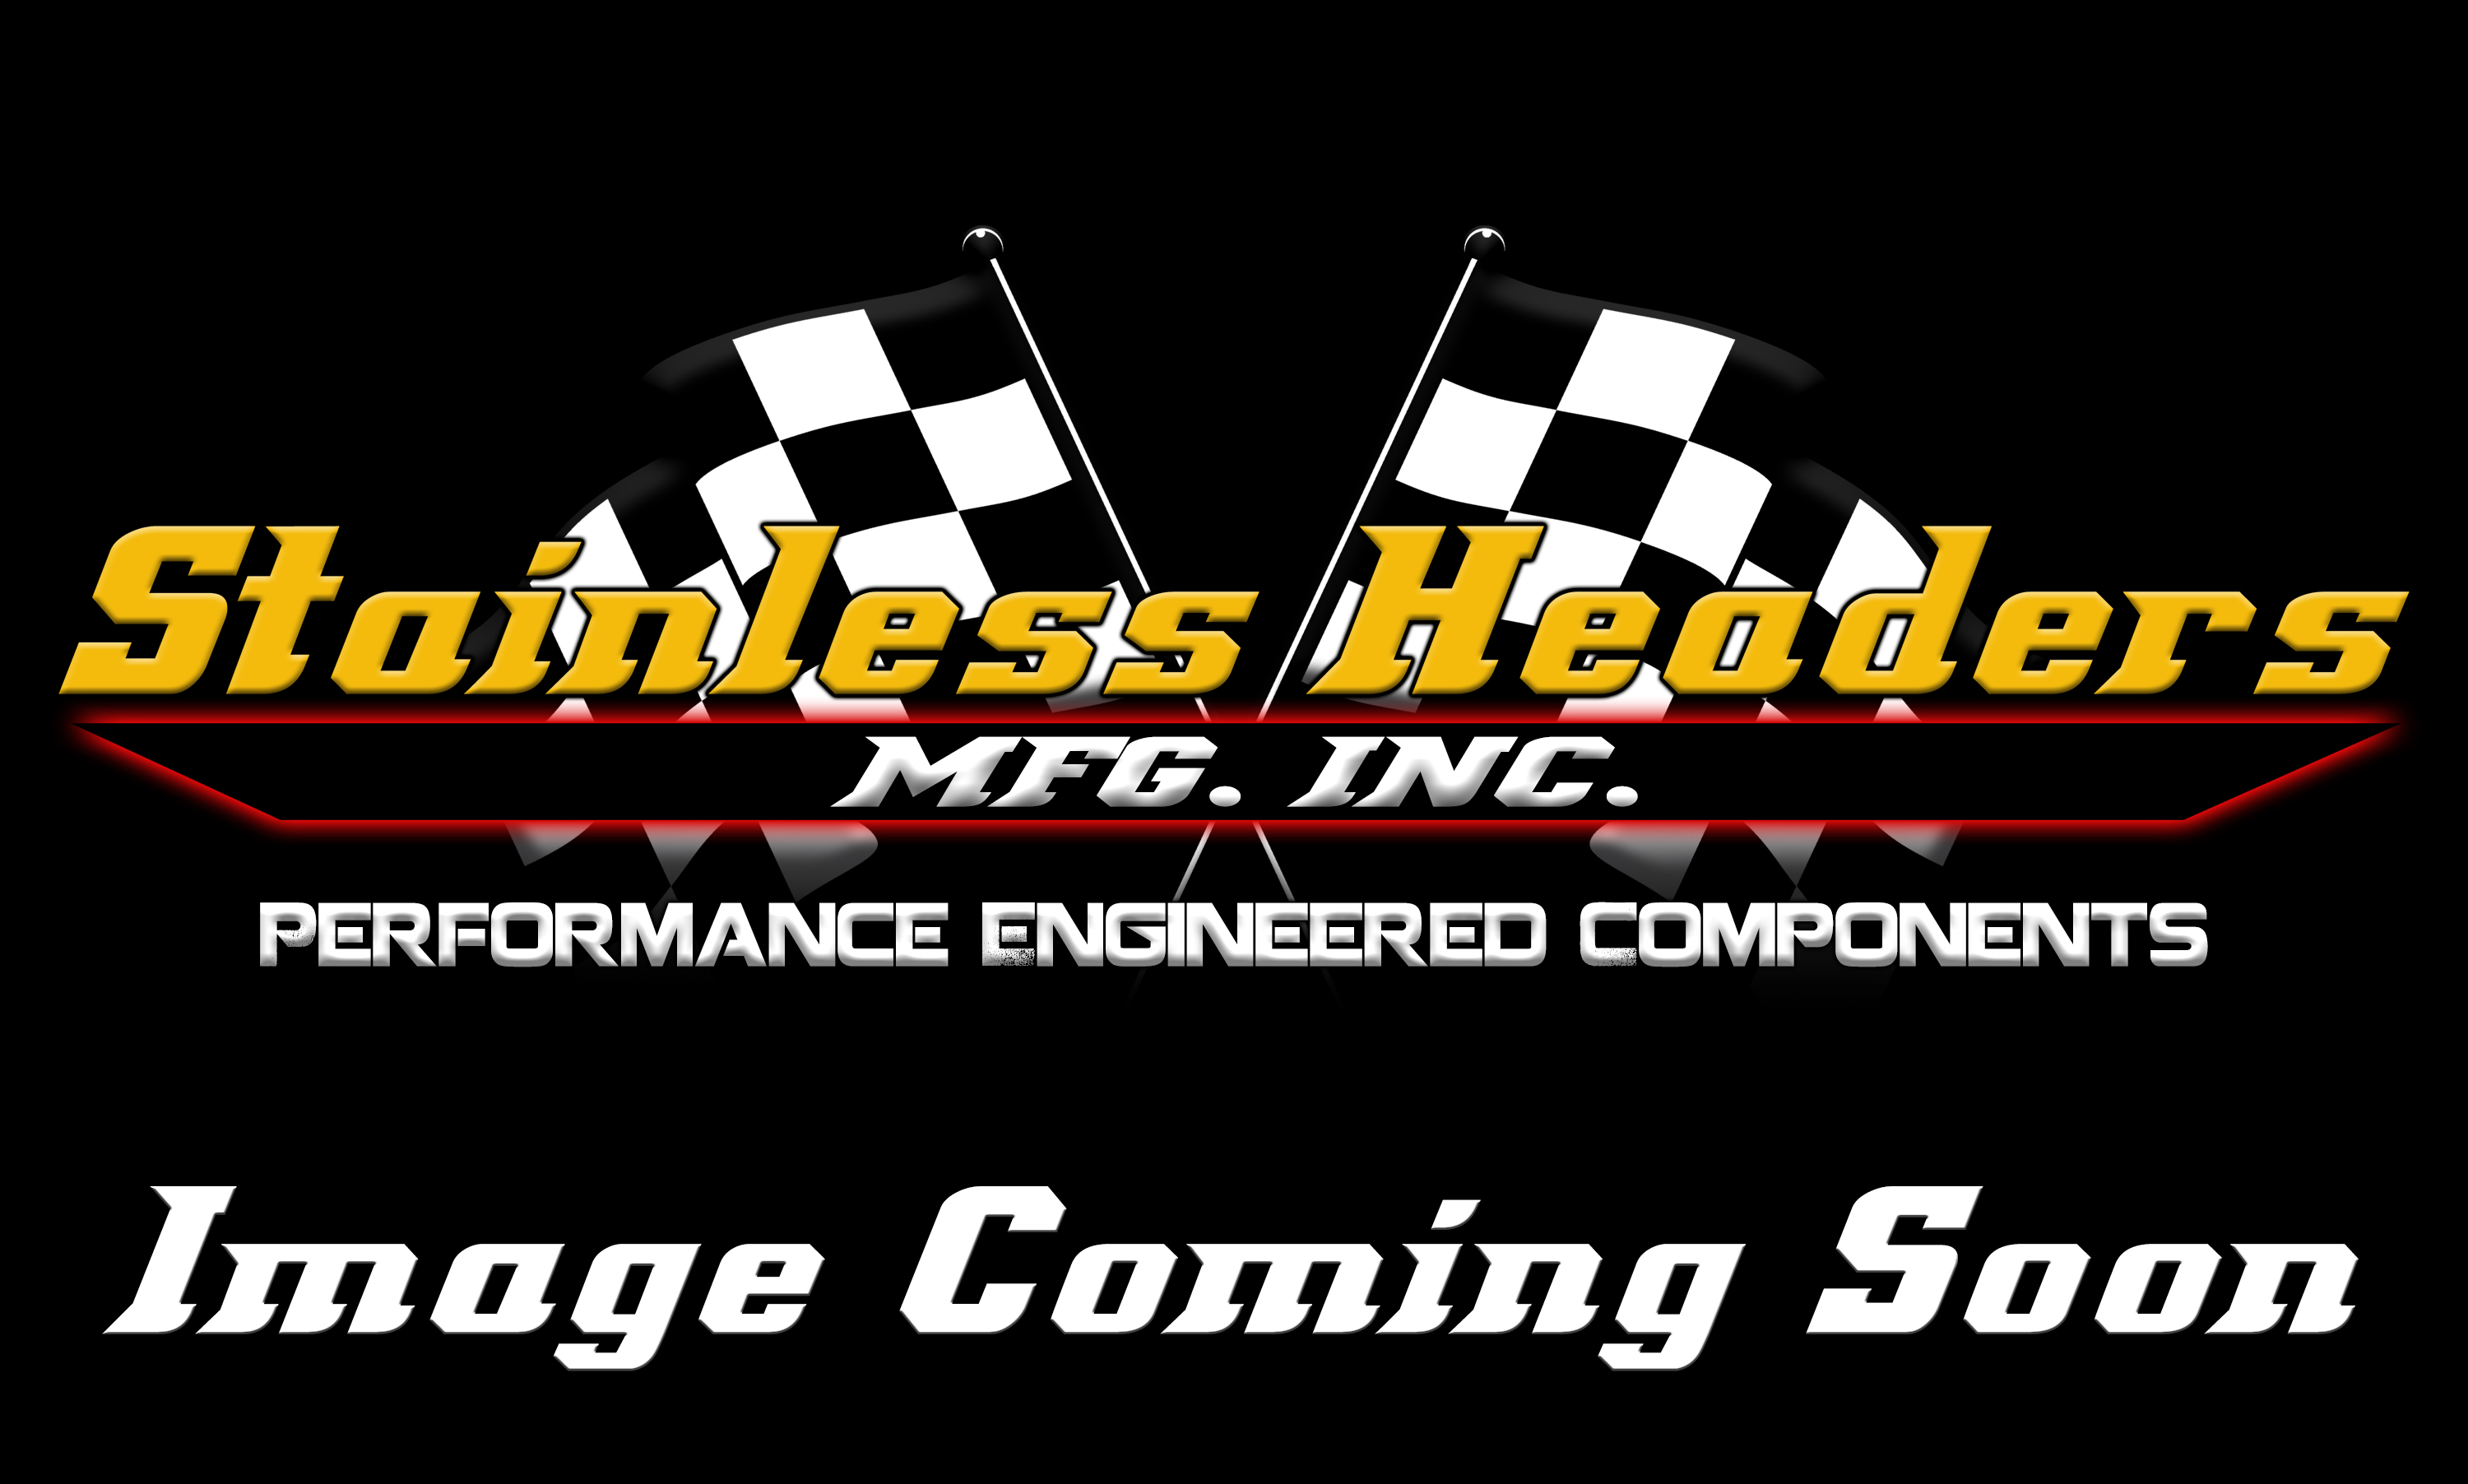 Stainless Steel Header Flanges - Mopar Stainless Steel Header Flanges - Stainless Headers - Mopar 6.1L Hemi 1/2" Thick Stainless Turbo Header Flange